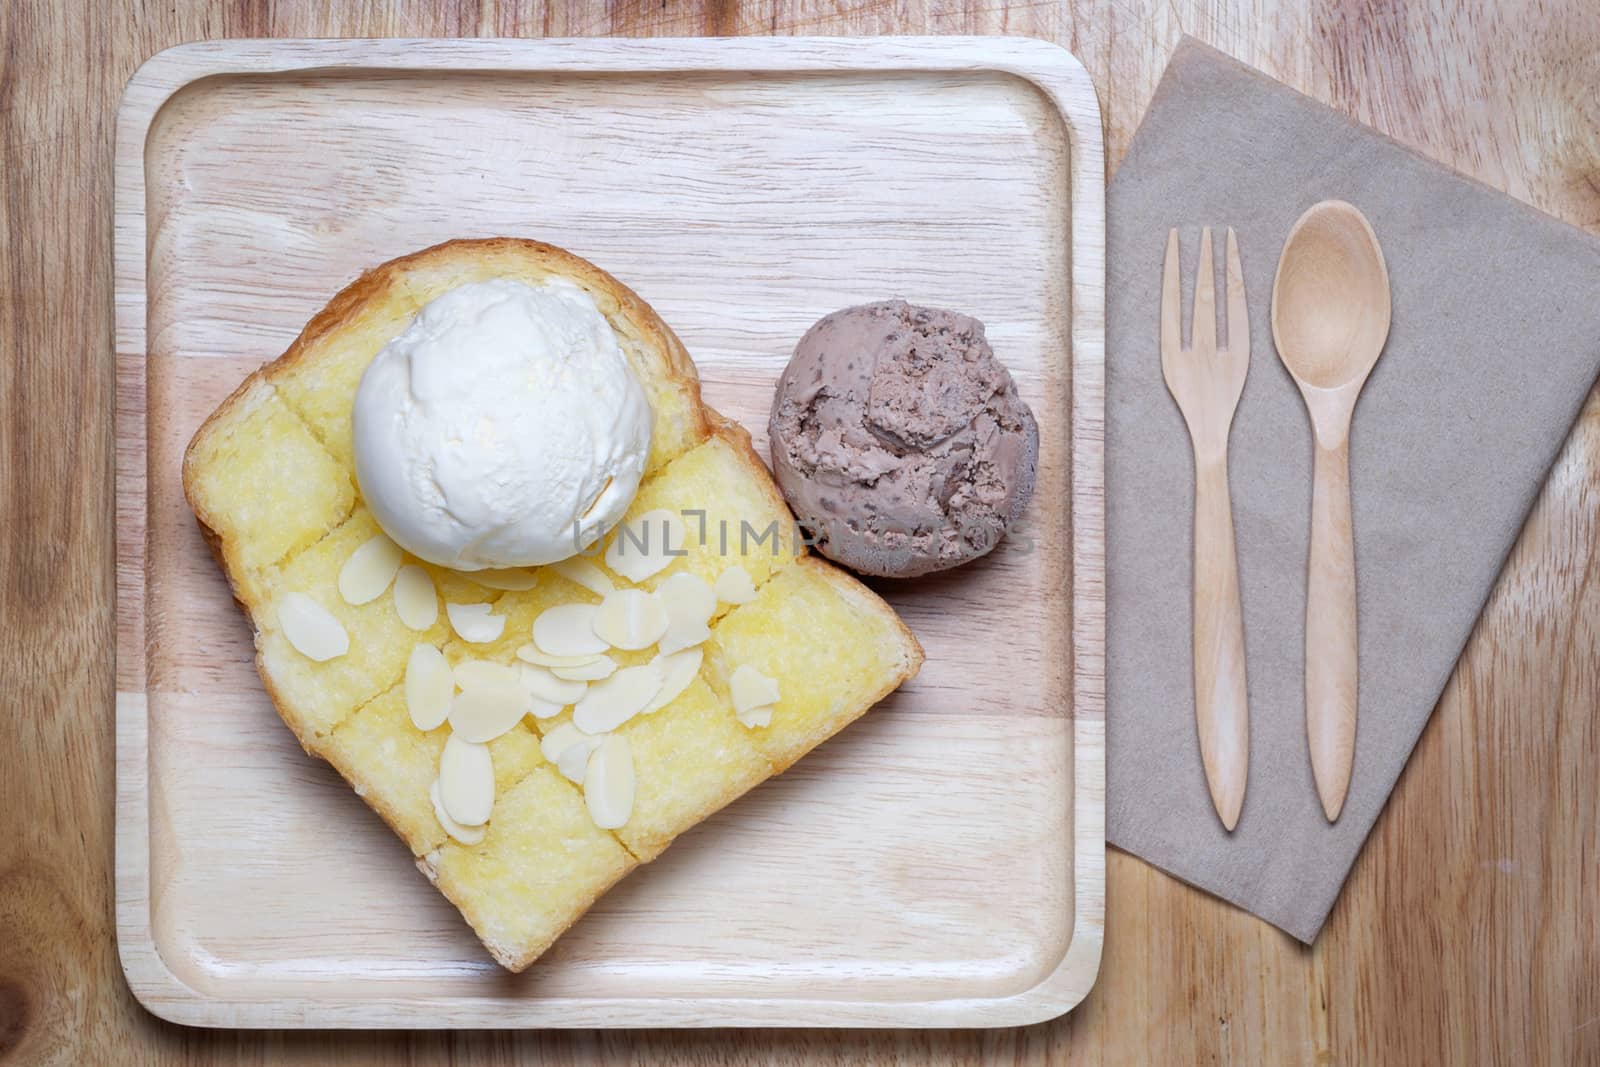 ice creams and almond slice on toast, all put on wooden plate. wooden fork and spoon on table.